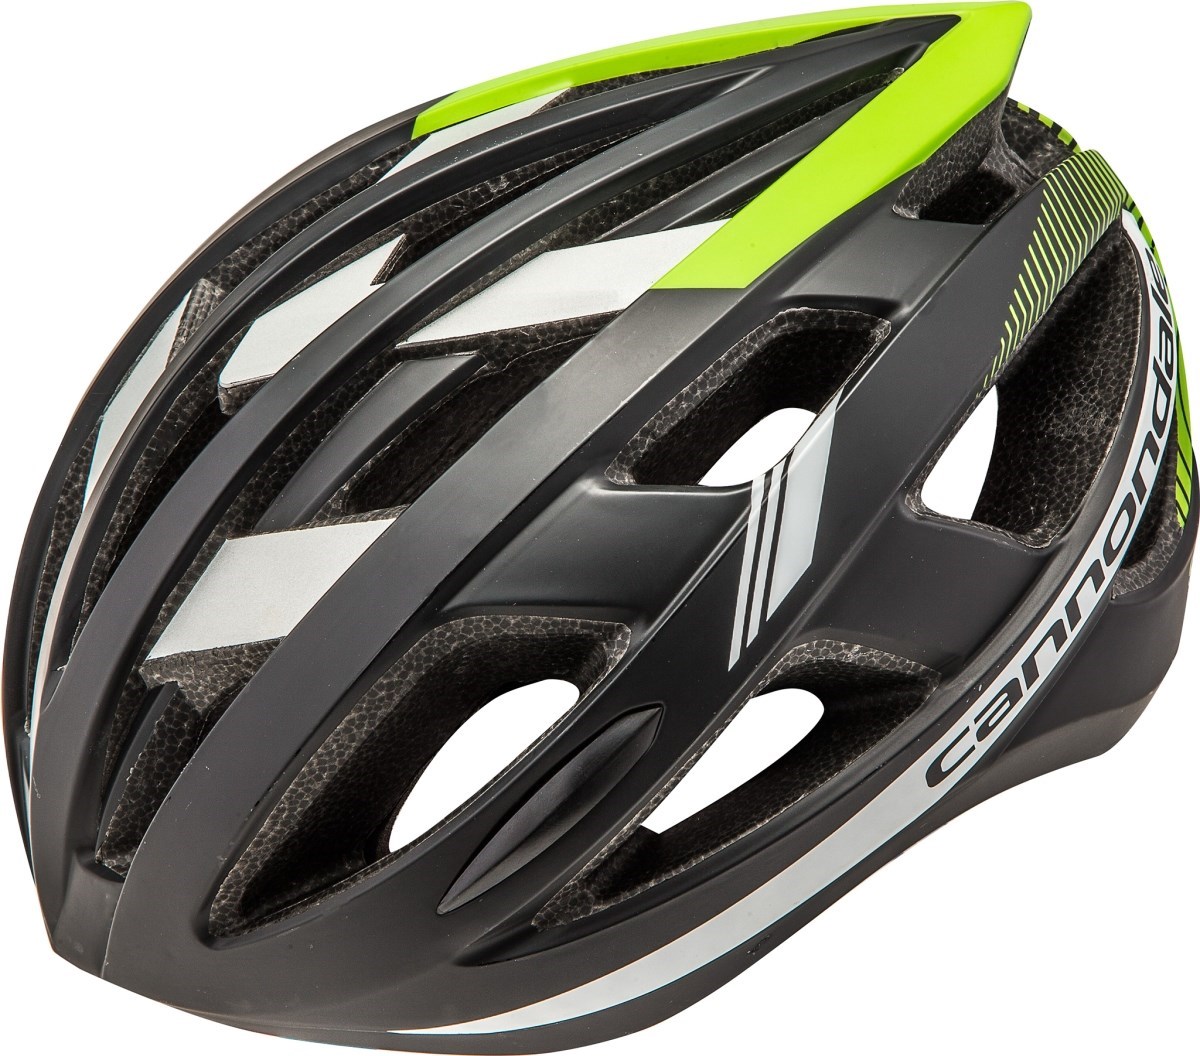 Cannondale CAAD Road Cycling Helmet 2016 product image